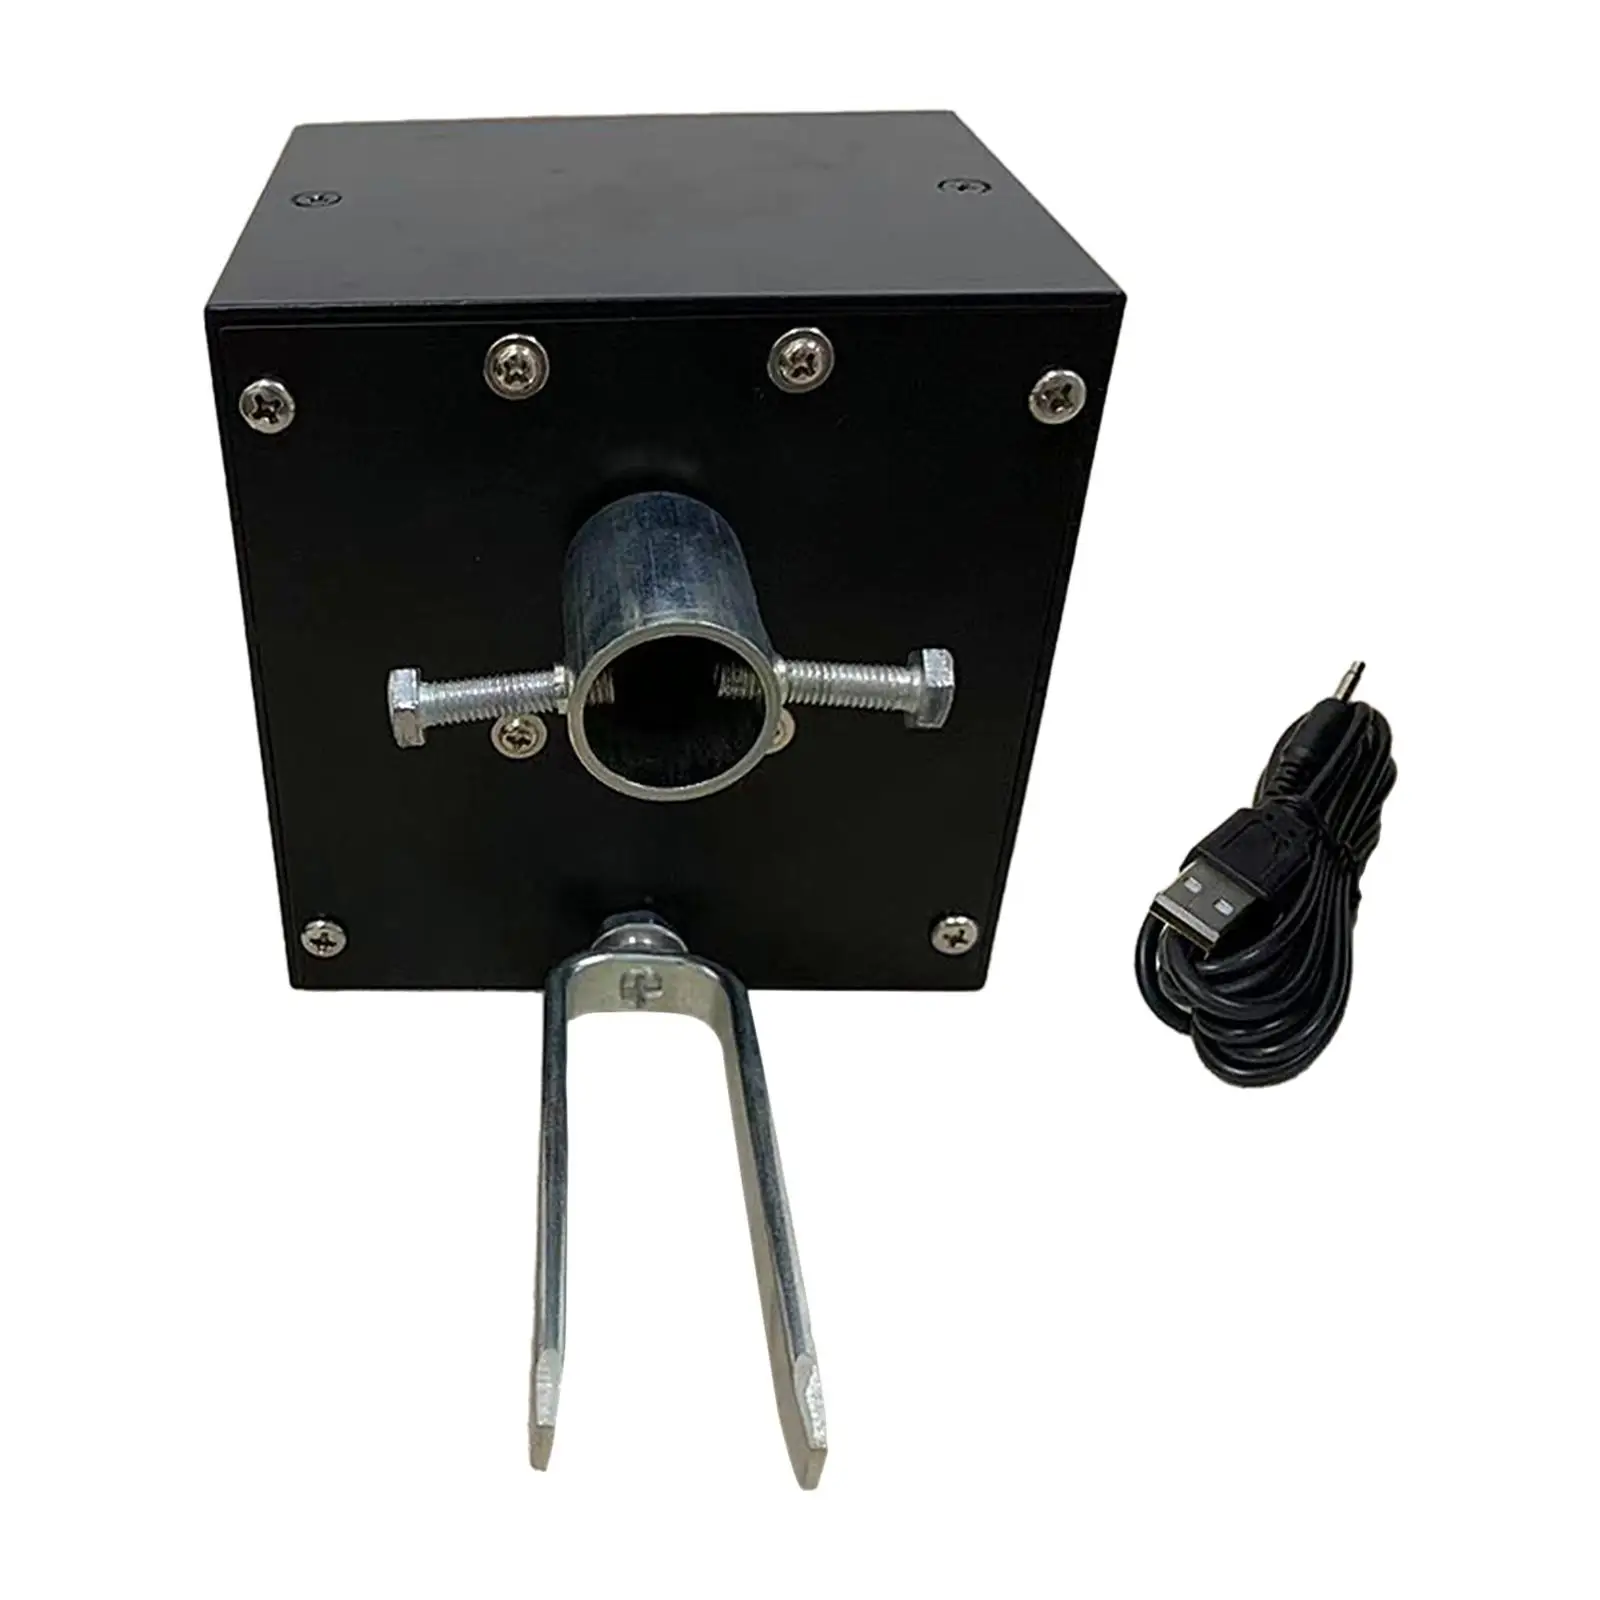 Rotisserie Motor Electric 30kg Load Low Noise Barbecue Tool BBQ Motor Barbecue Motor Grill Motor for Camping Home Outdoor Picnic